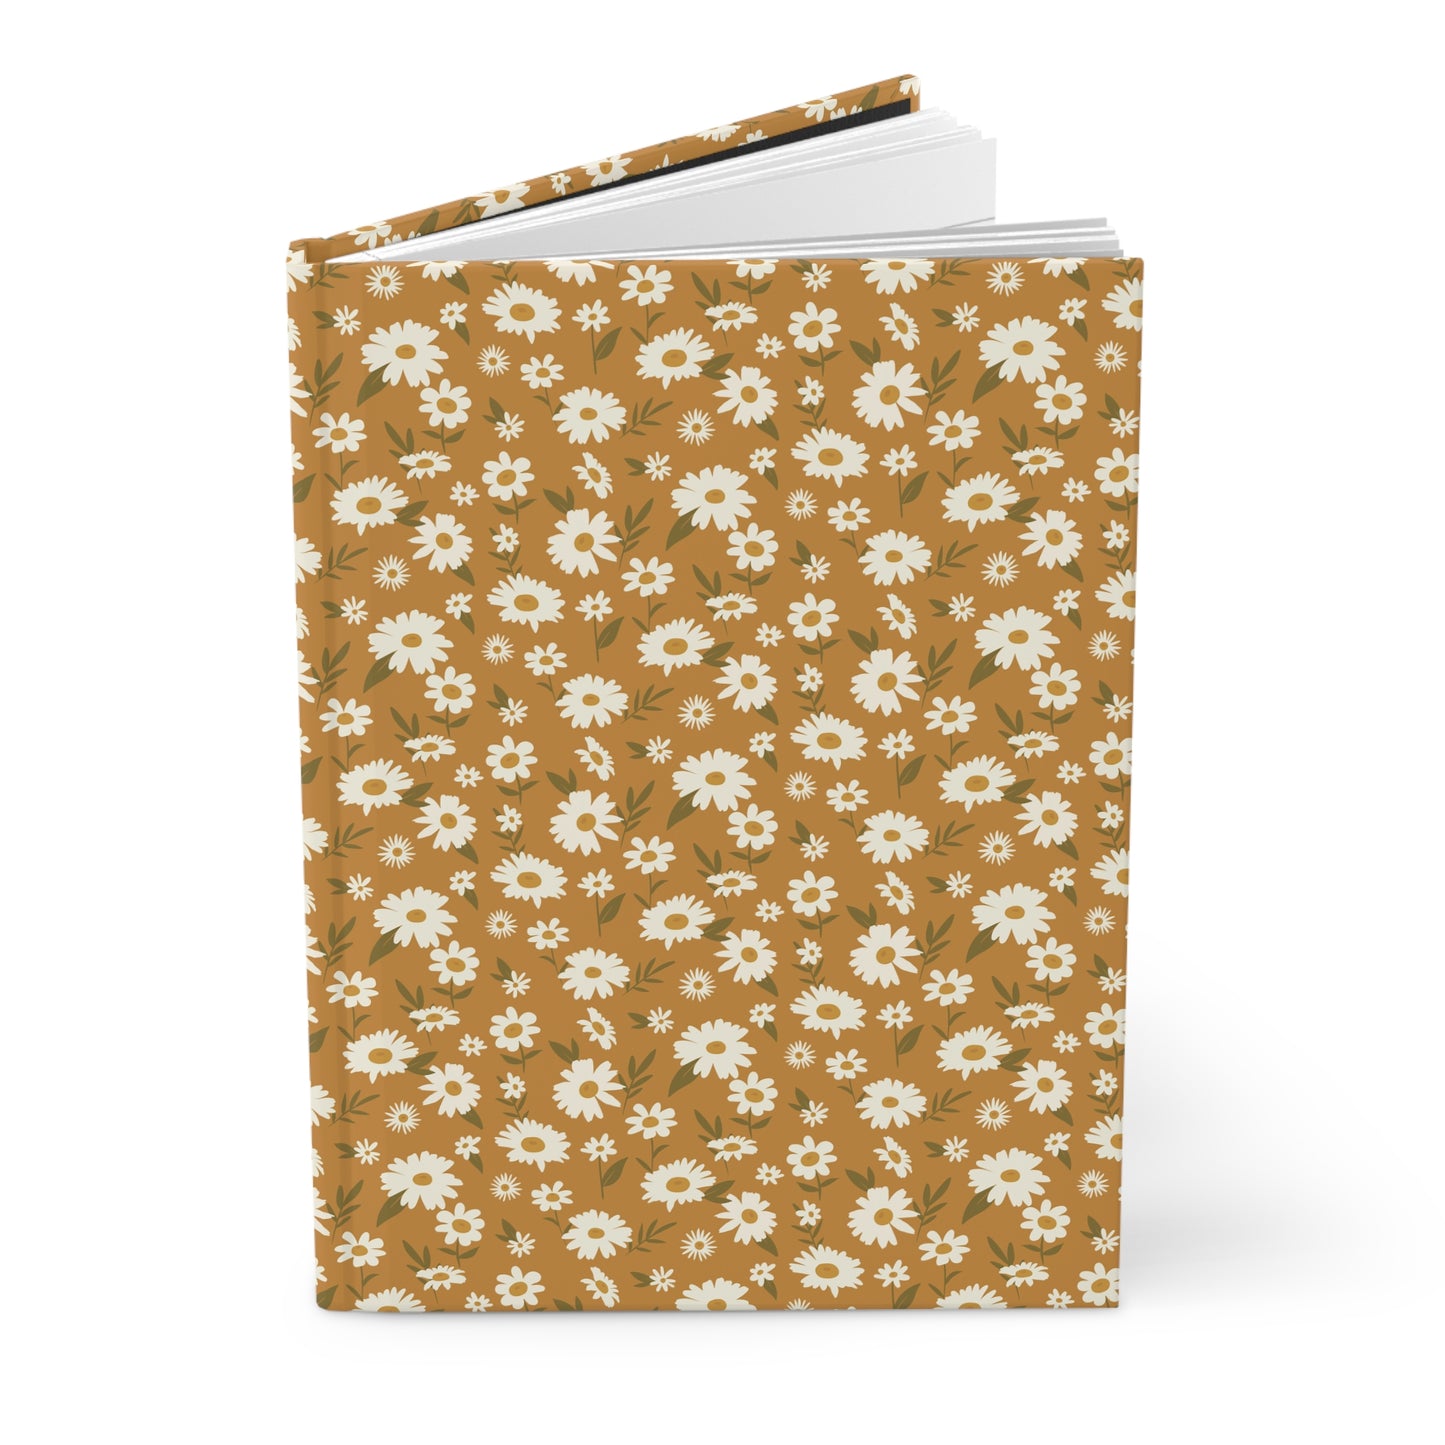 Golden Daisies Hardcover Journal - Line Ruled